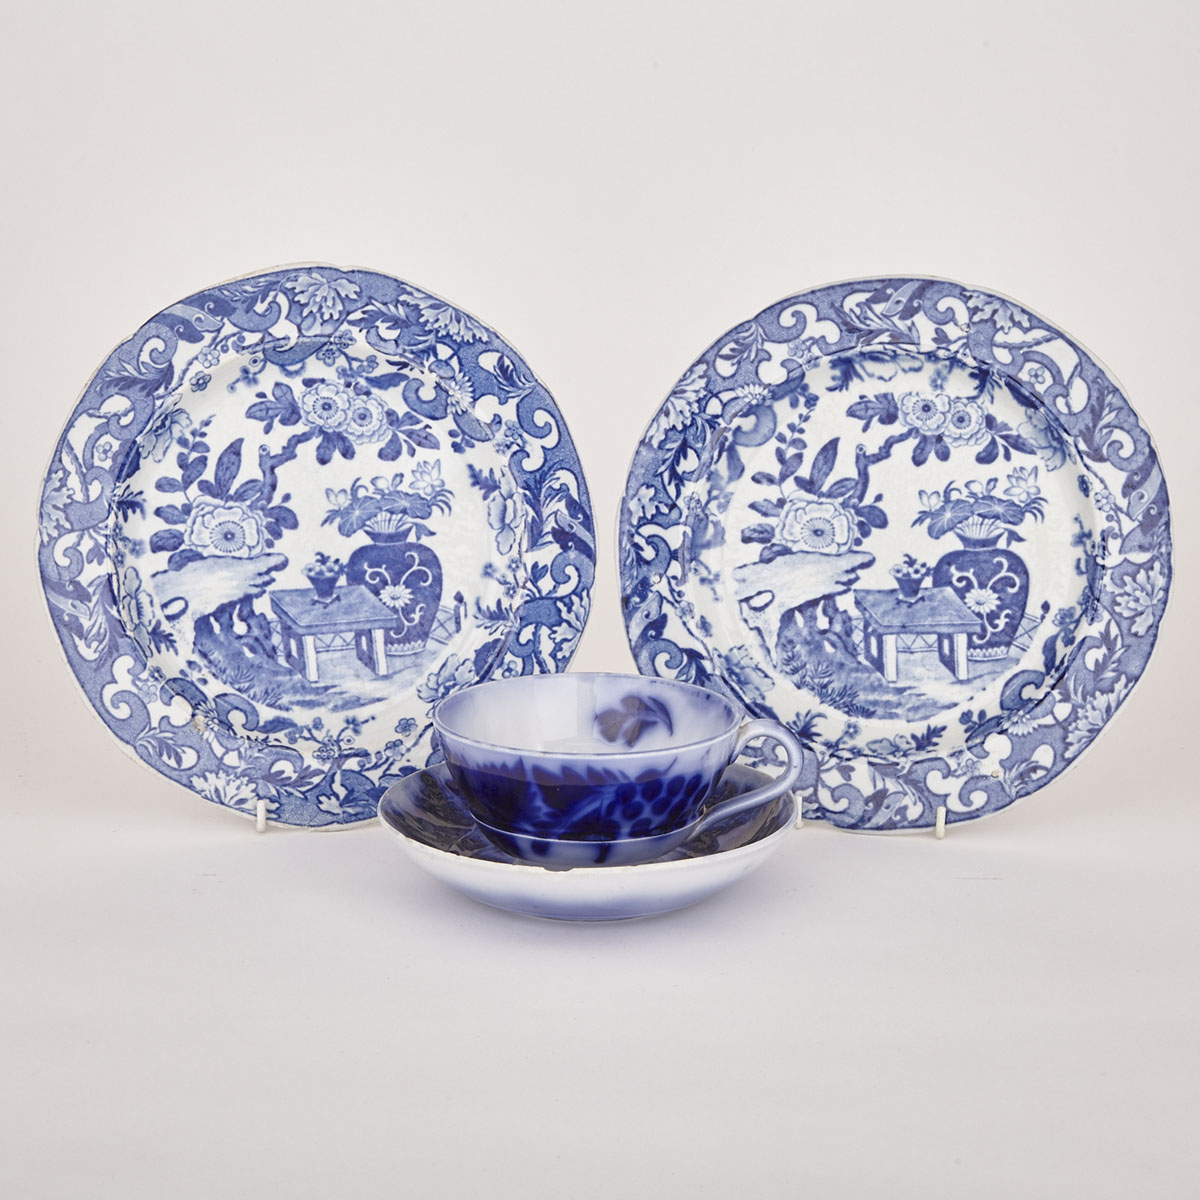 Pair of Mason’s Chinoiserie Blue and White Transfer Printed Plates and a ’Flow Blue’ Cup and Saucer, c.1825